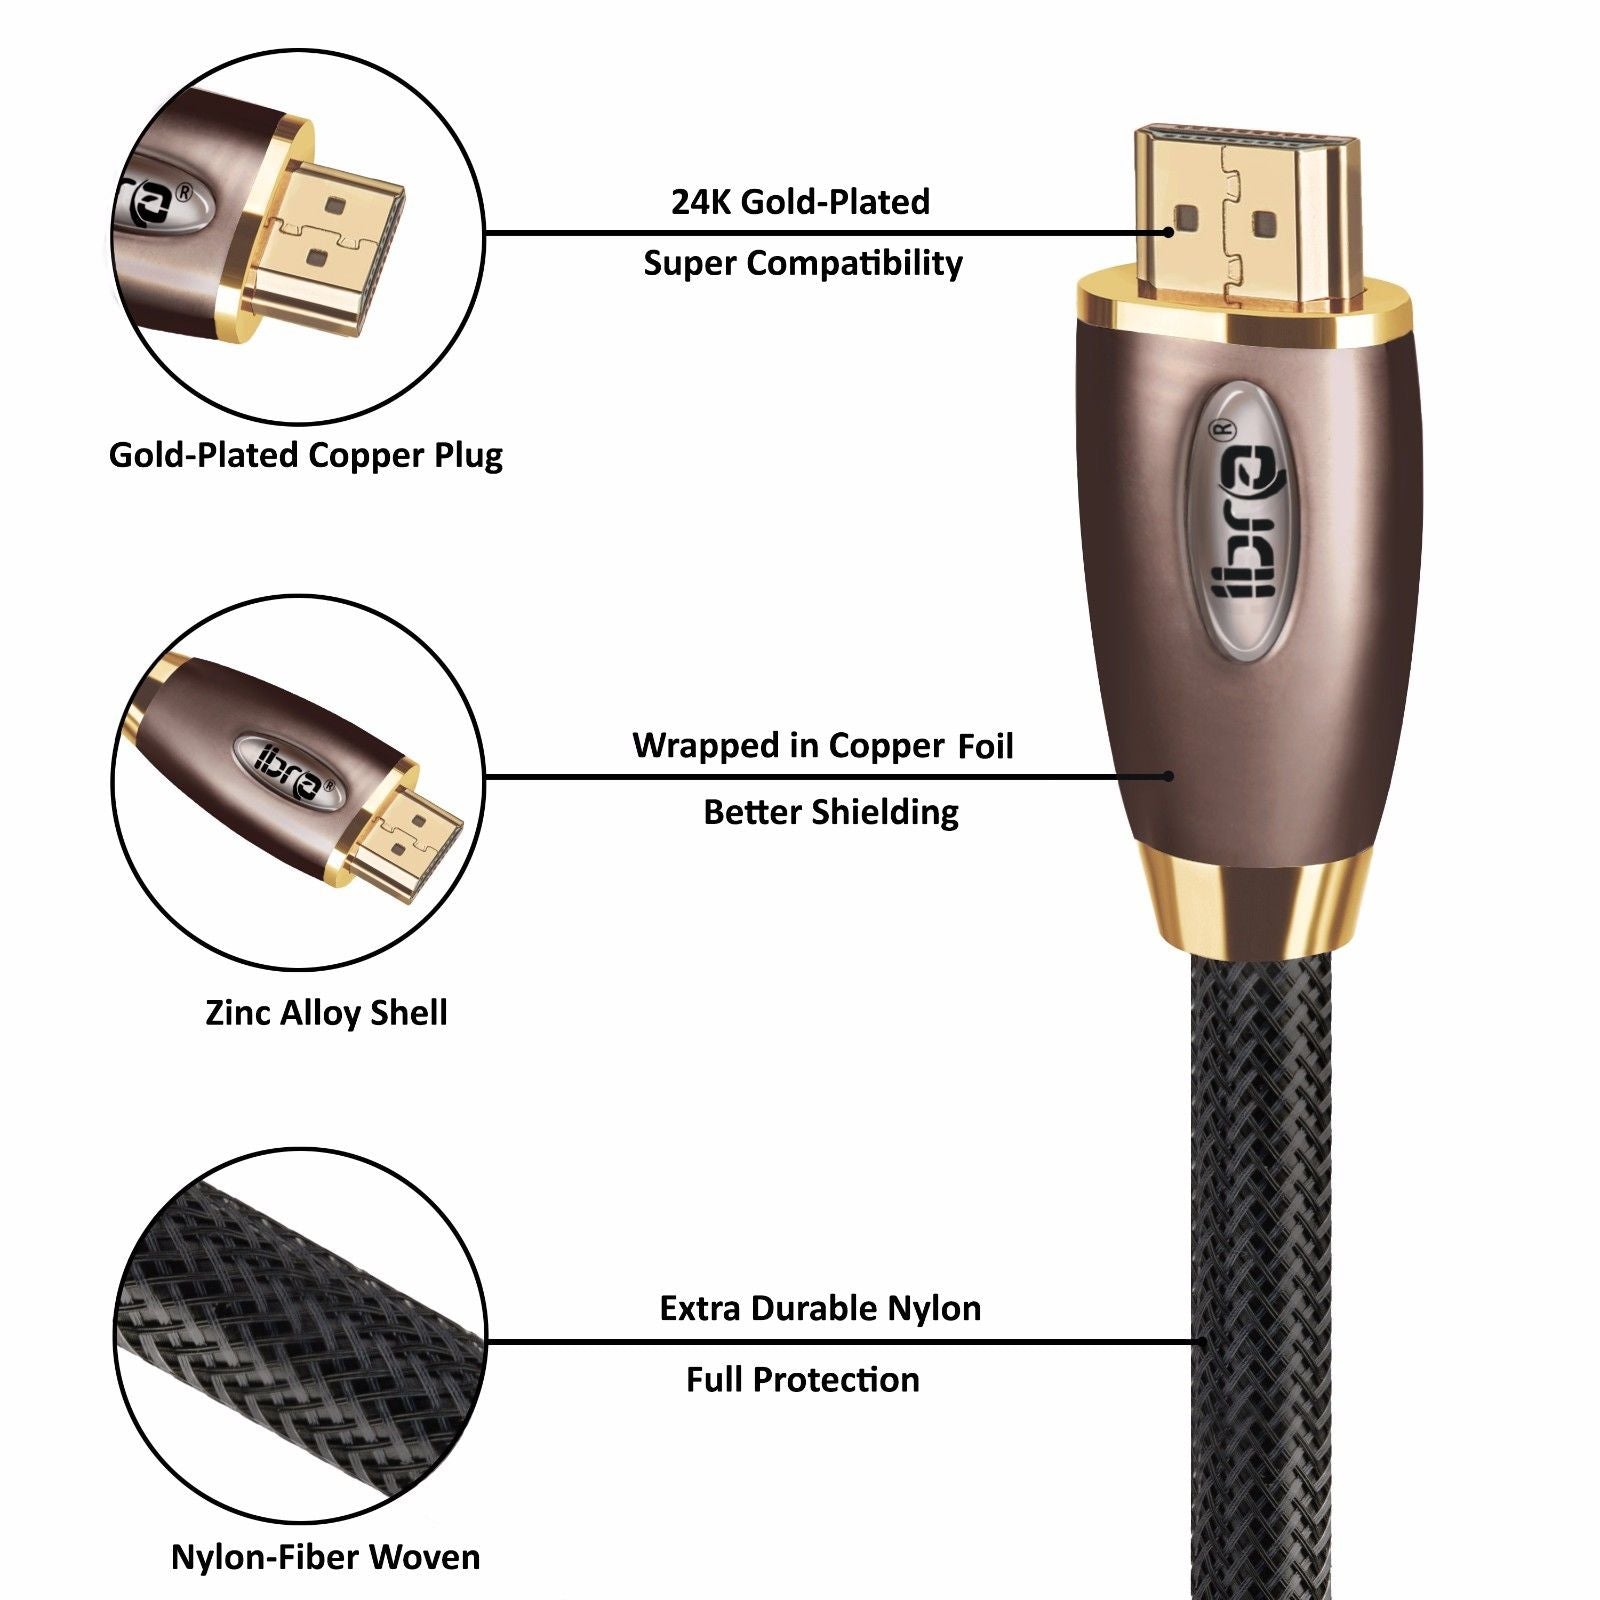 3M IBRA RED 2.1 HDMI Cable 8K Ultra High-Speed 48Gbps Lead | Supports 8K@60HZ, 4K@120HZ, 4320p, Compatible with Fire TV, 3D Support, Ethernet Function, 8K UHD, 3D-Xbox PlayStation PS3 PS4 PC etc